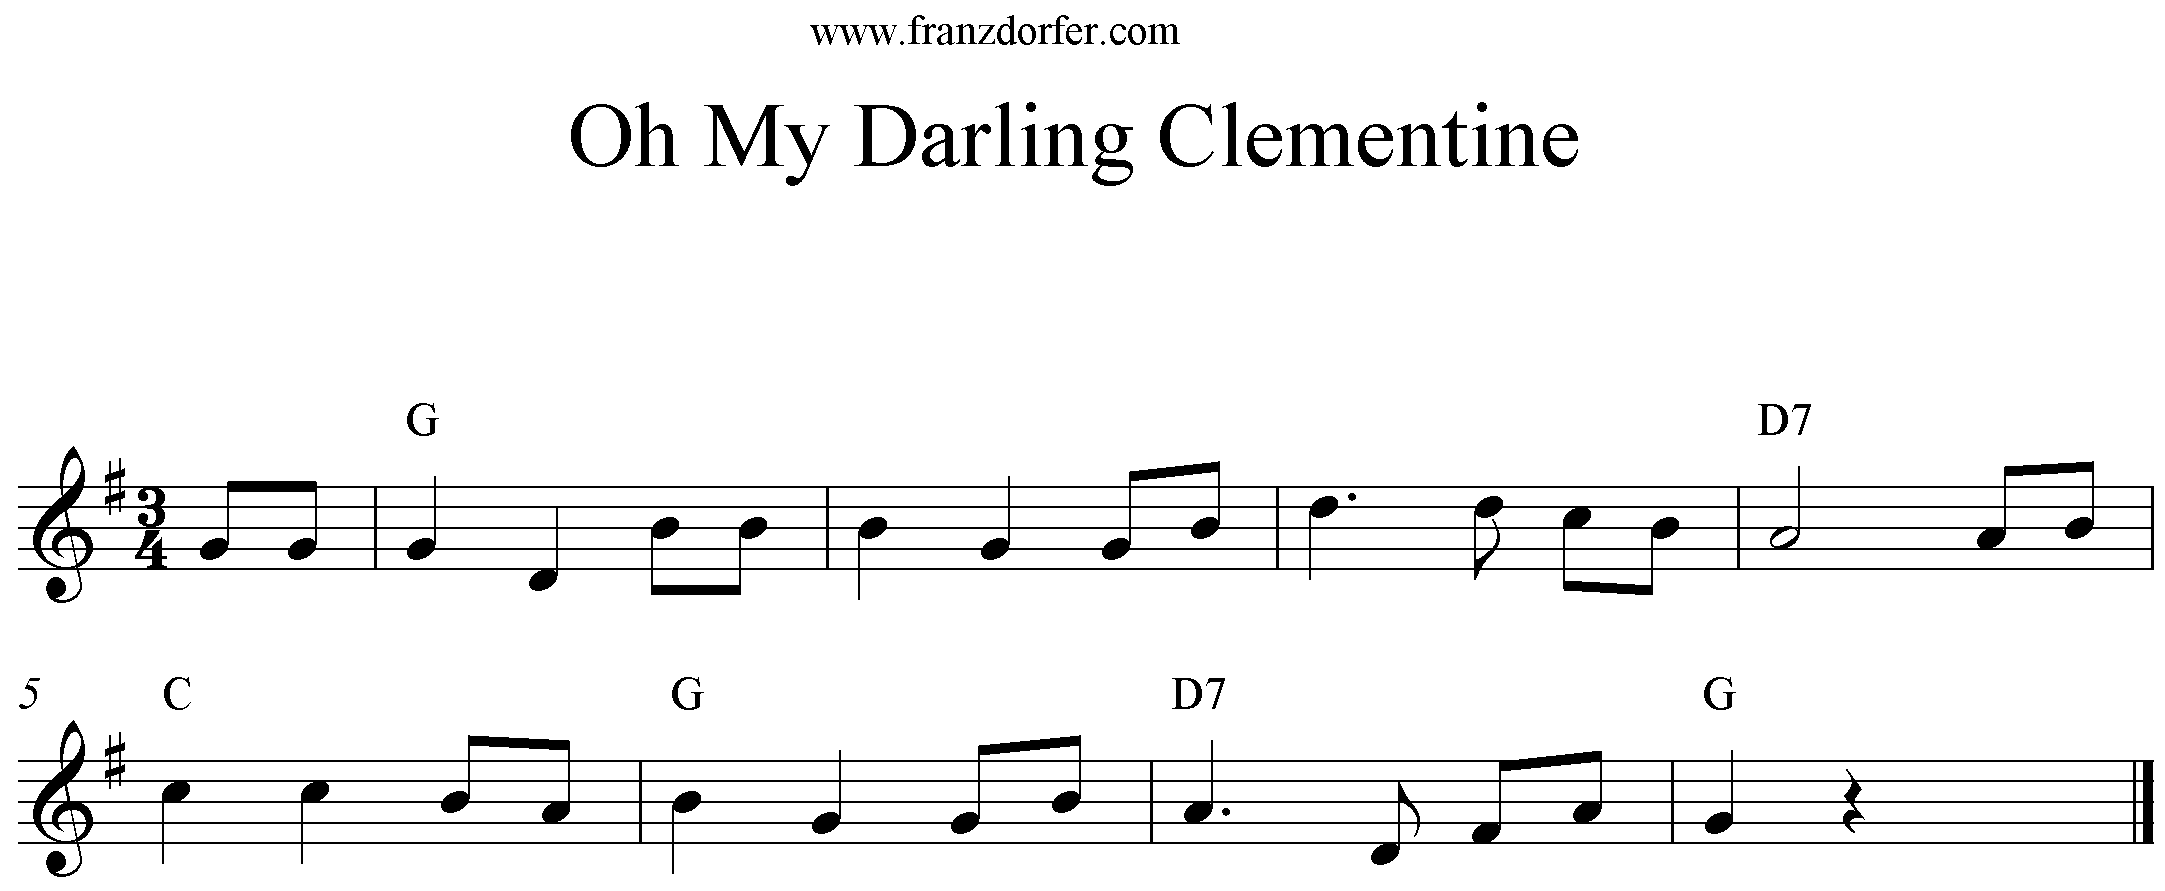 Oh My Darling Clementine